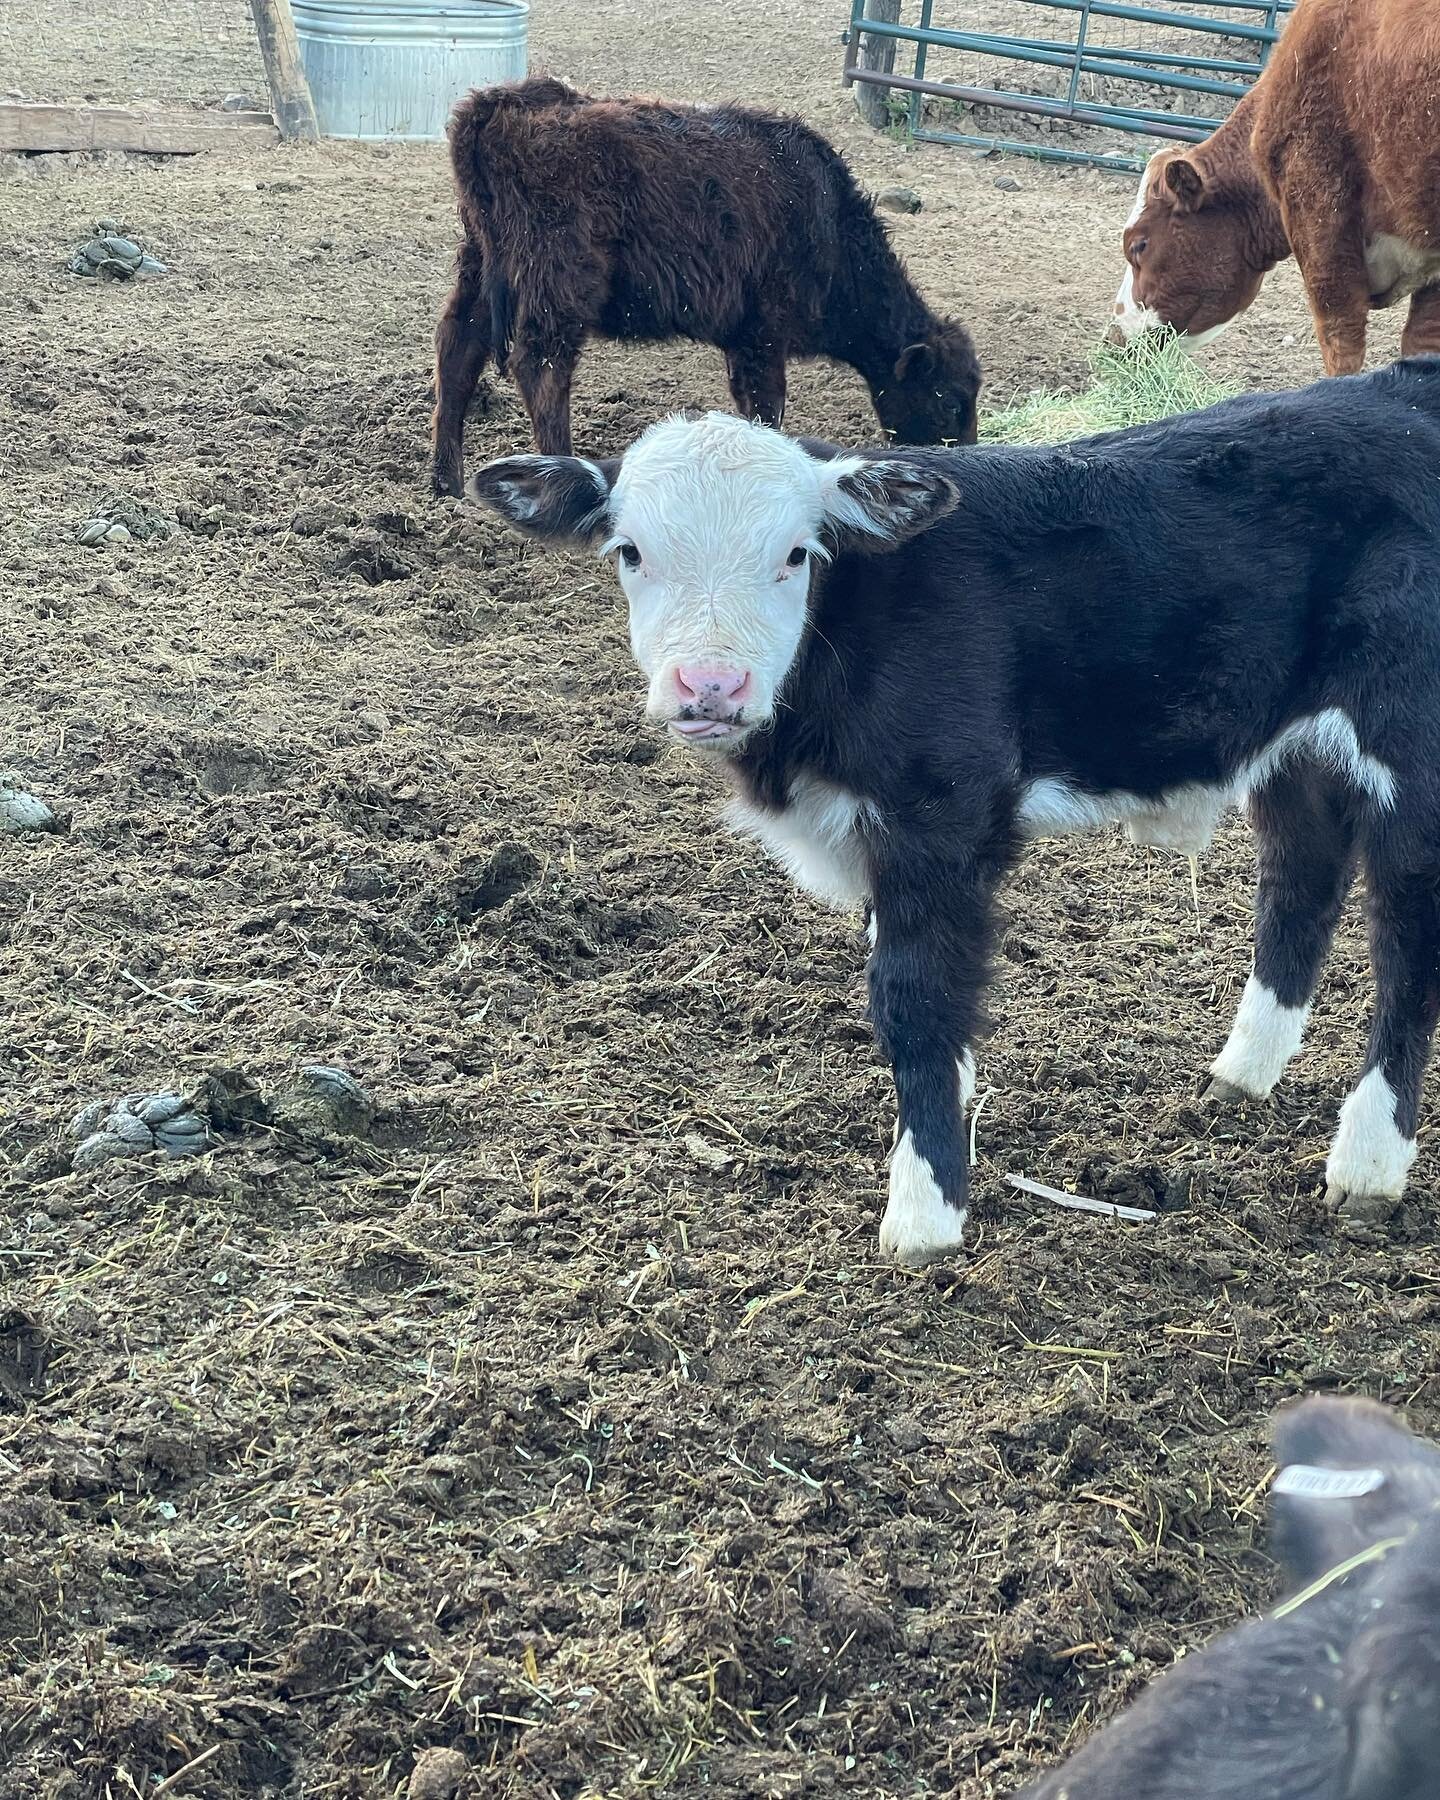 He just wants to say Good Morning that&rsquo;s all! 🐮☀️ Your support will Help Us Corral Poverty One Head at a Time! Steerdup.org  #Steerdup #Cattle #Lowline #Herefords #Angus #Beef #Cattle #RaisingBeefForFood #FeedTheHomeless #BeefForFoodPantries #